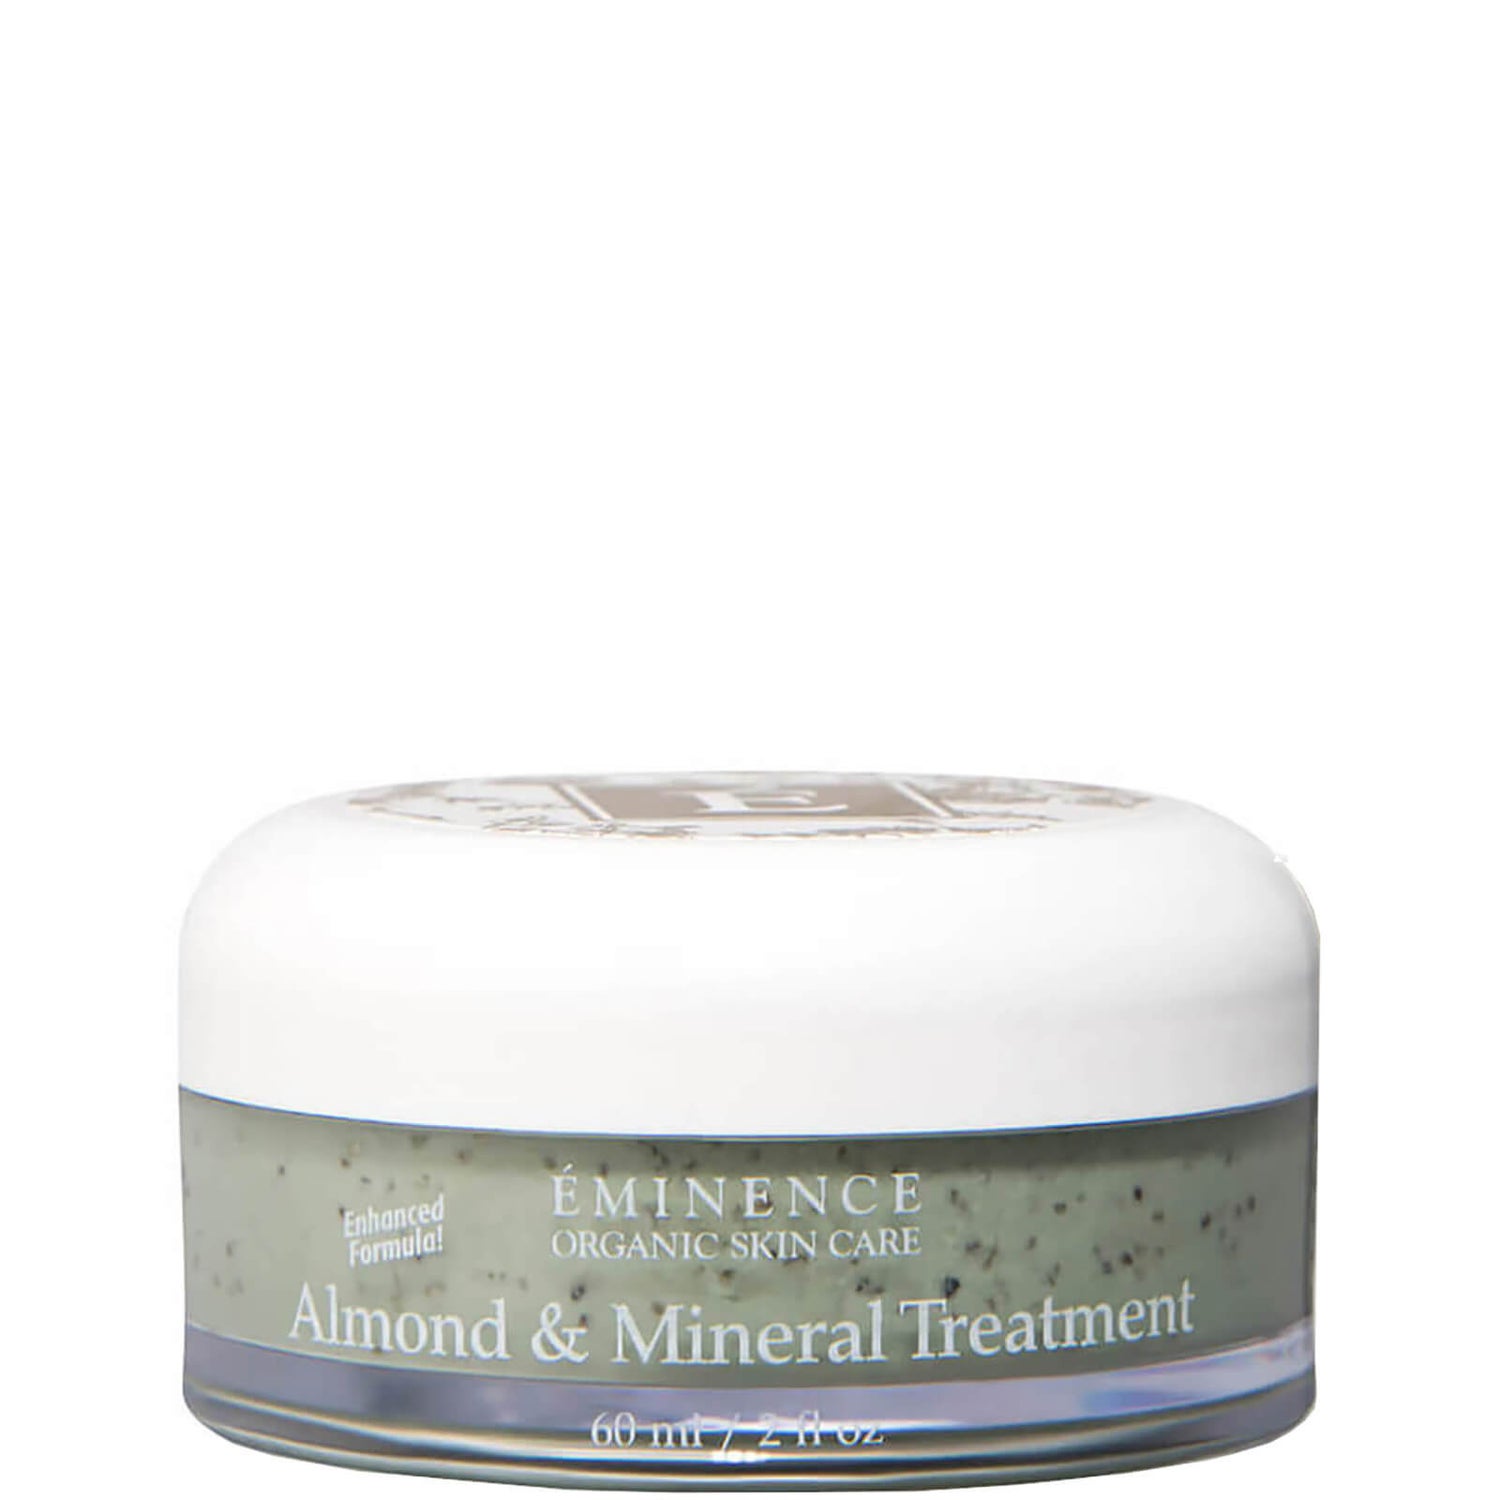 Eminence Organic Skin Care Almond and Mineral Treatment 2 fl. Oz